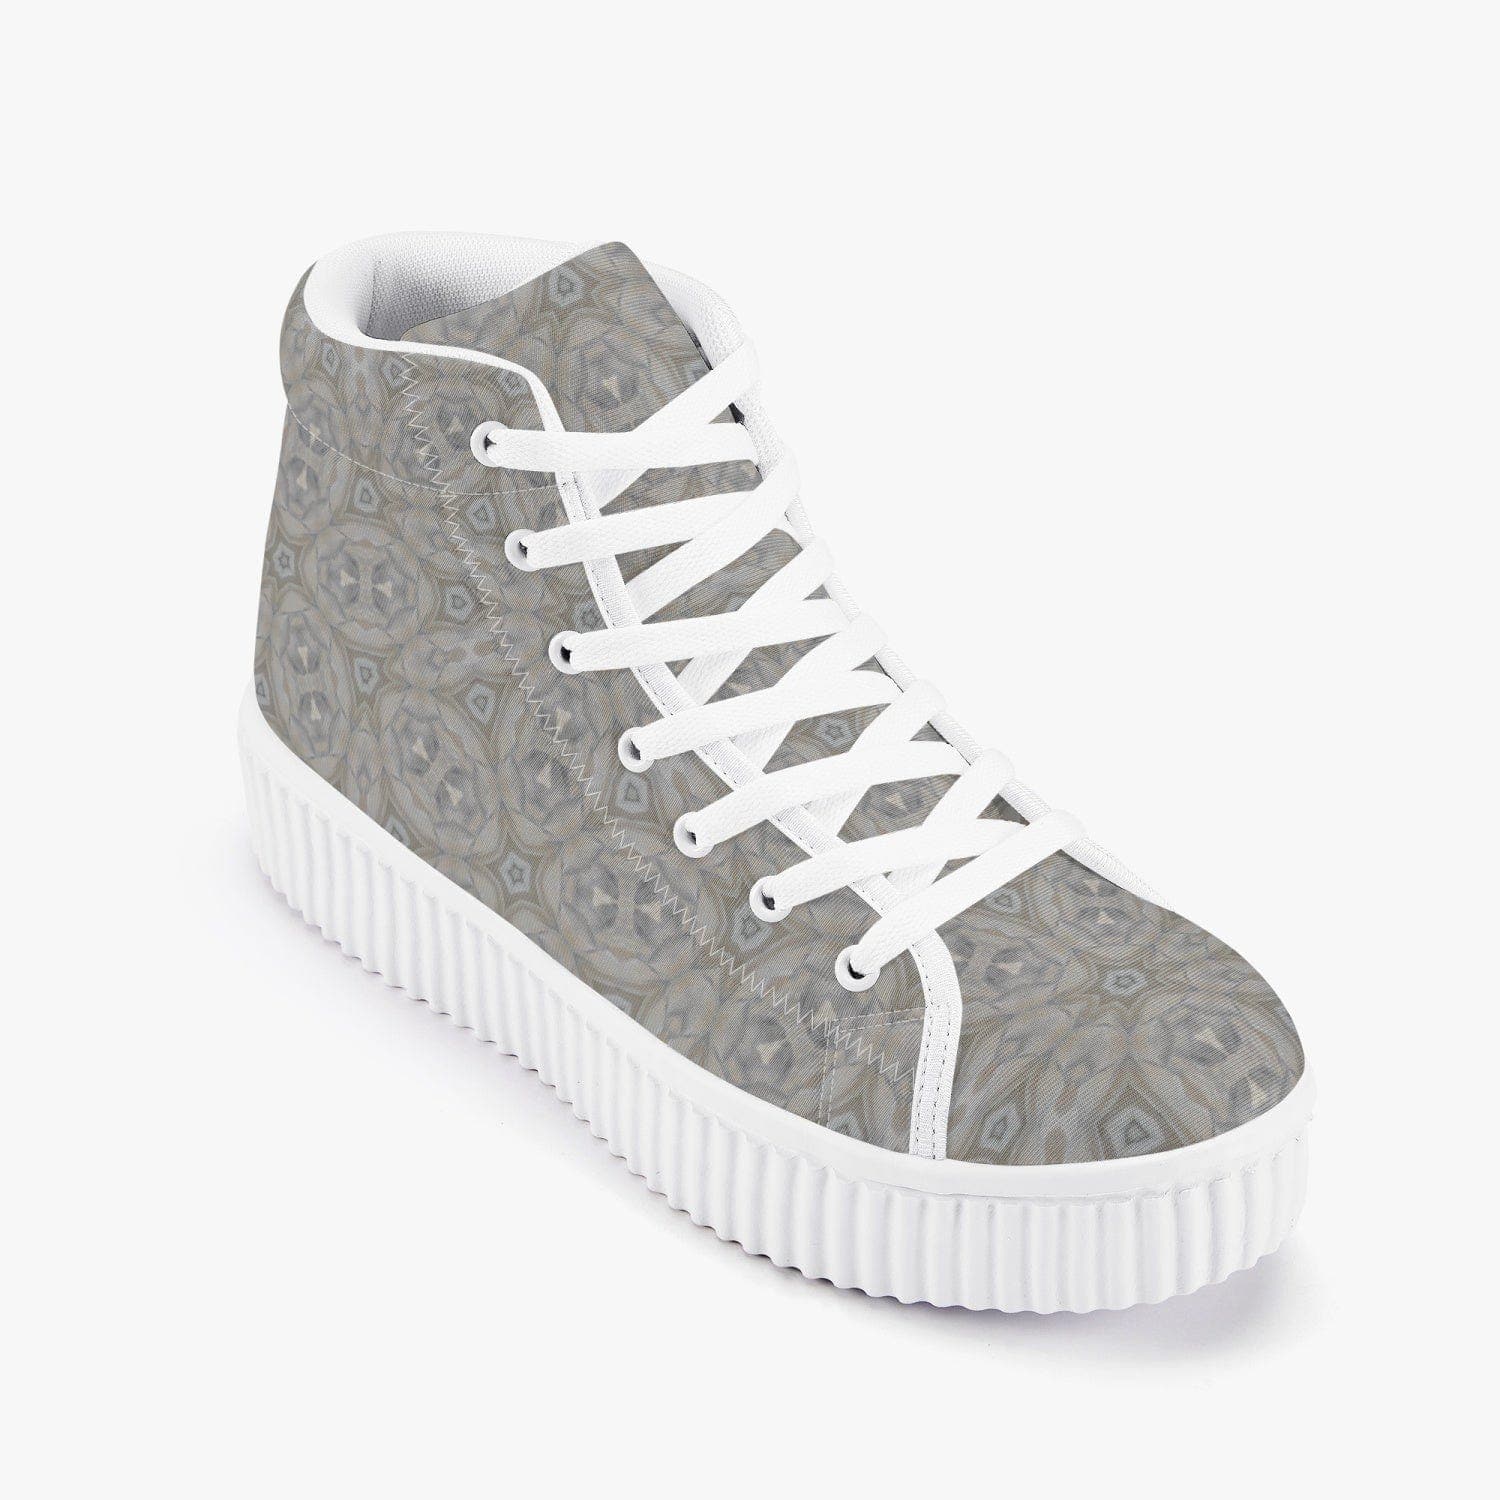 Shades of a White Rose,  Women’s High Top Hot Trendy Platform Sneakers, designed by Sensus Studio Design